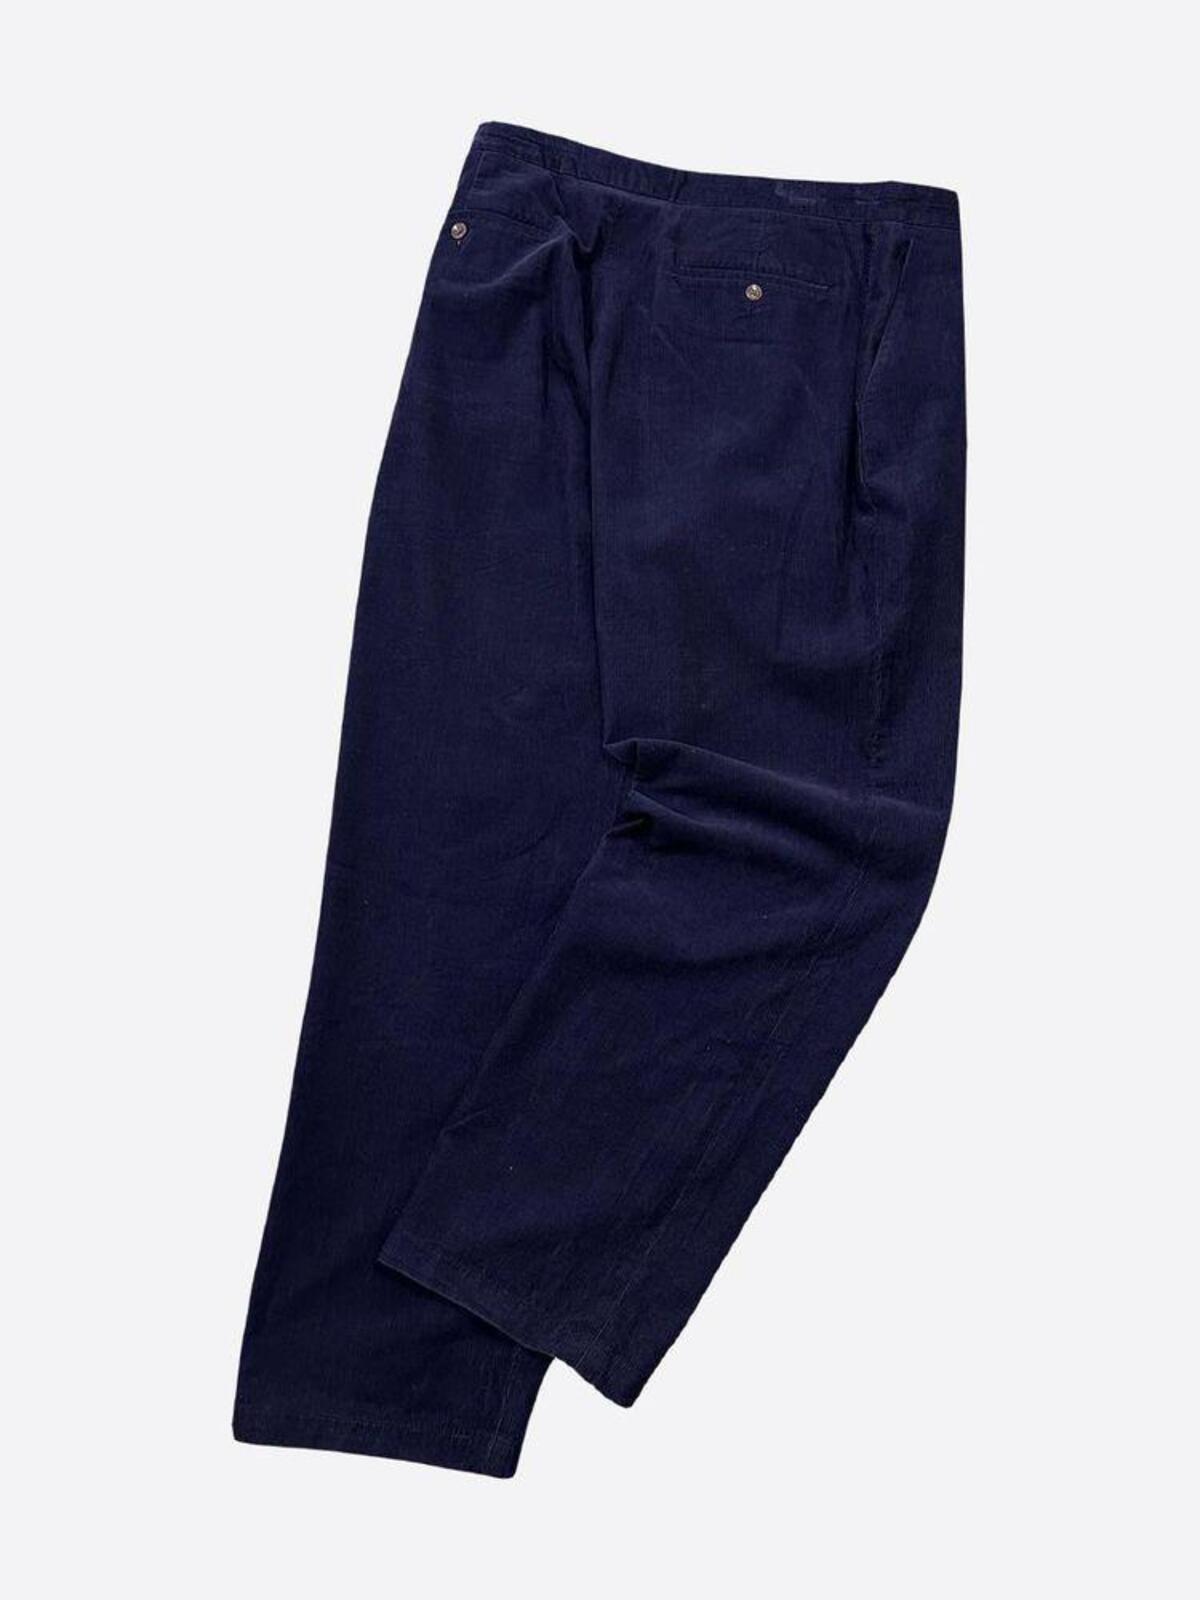 Flat Front Navy Corduroy Trouser (35inch) - With Homie 위드호미